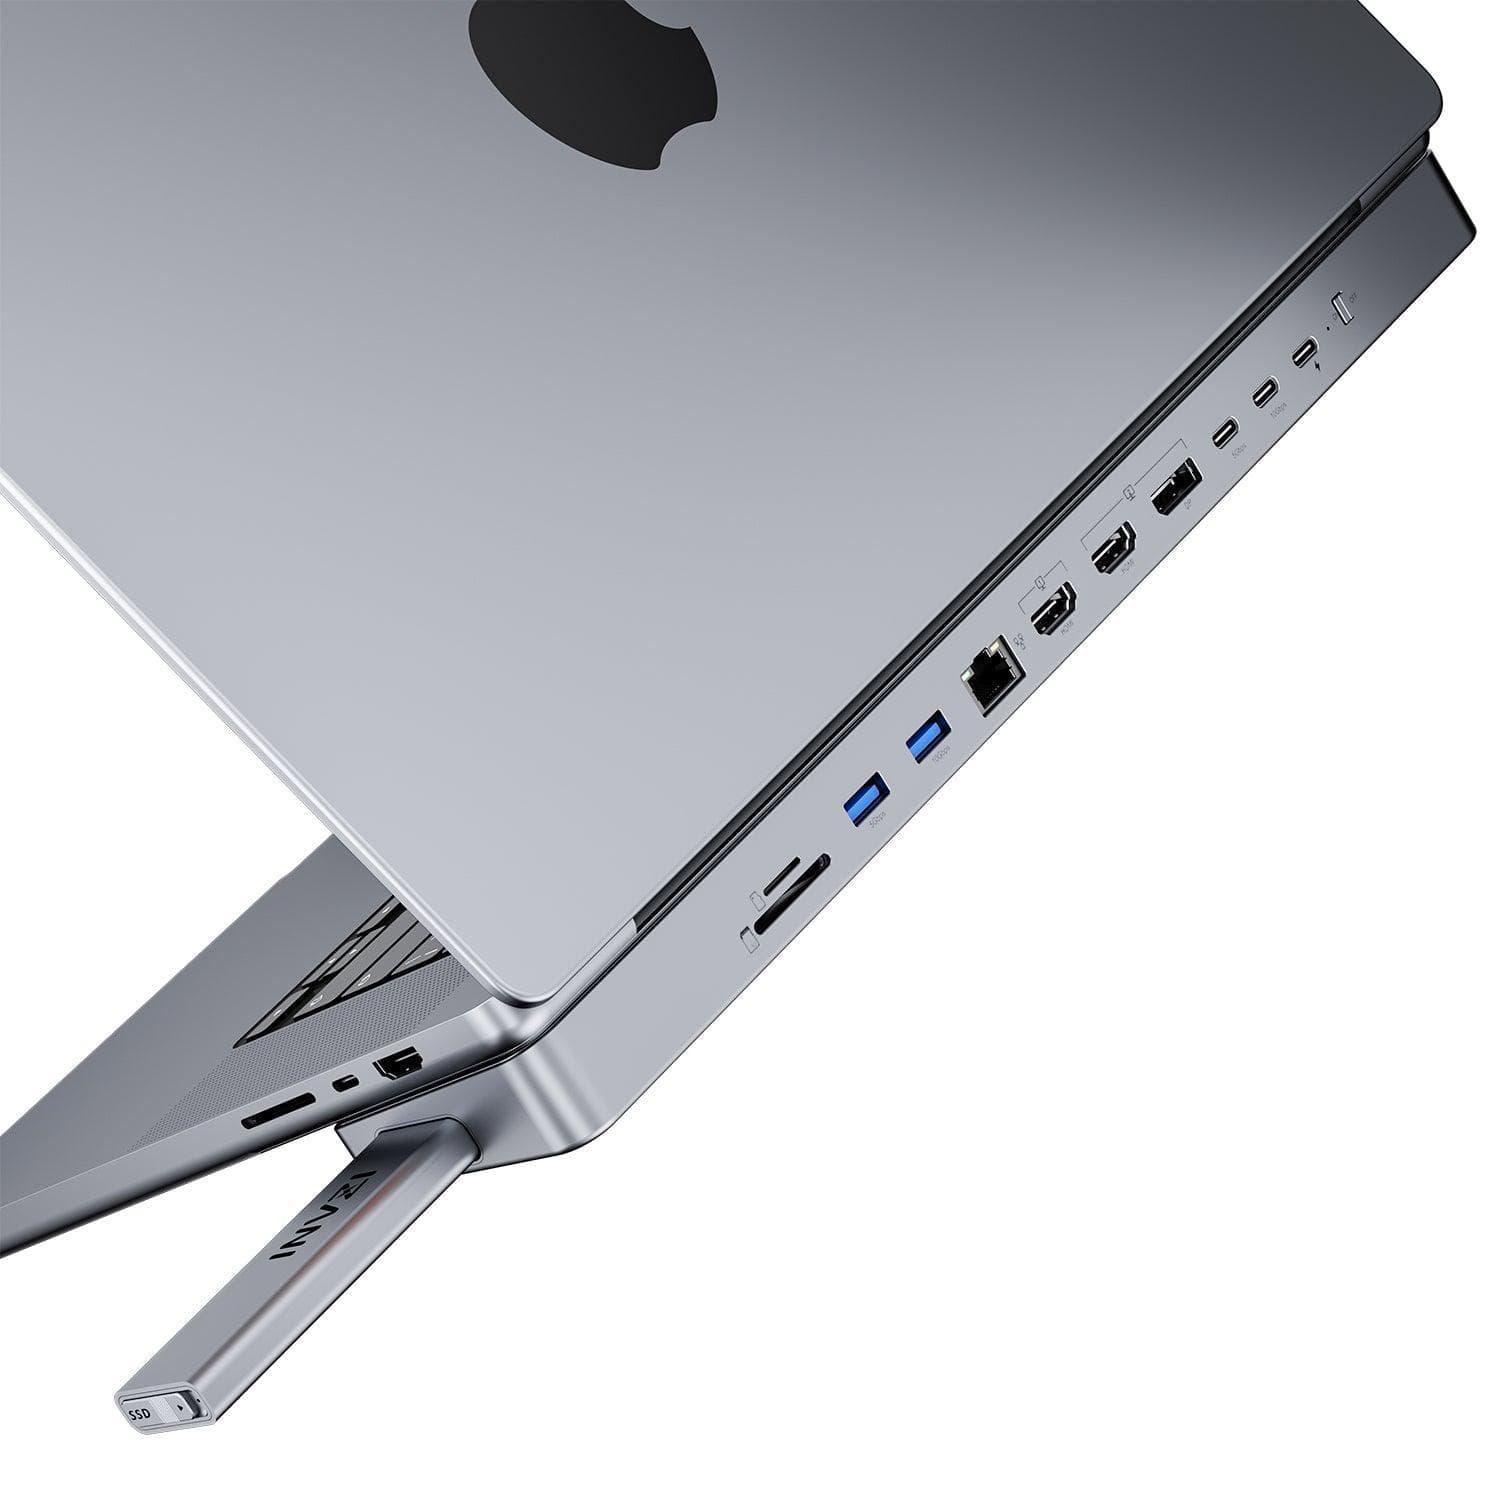 INVZI Laptop Docking Stations INVZI MagHub - Pop Up SSD USB-C Docking Station for MacBook Pro/Air